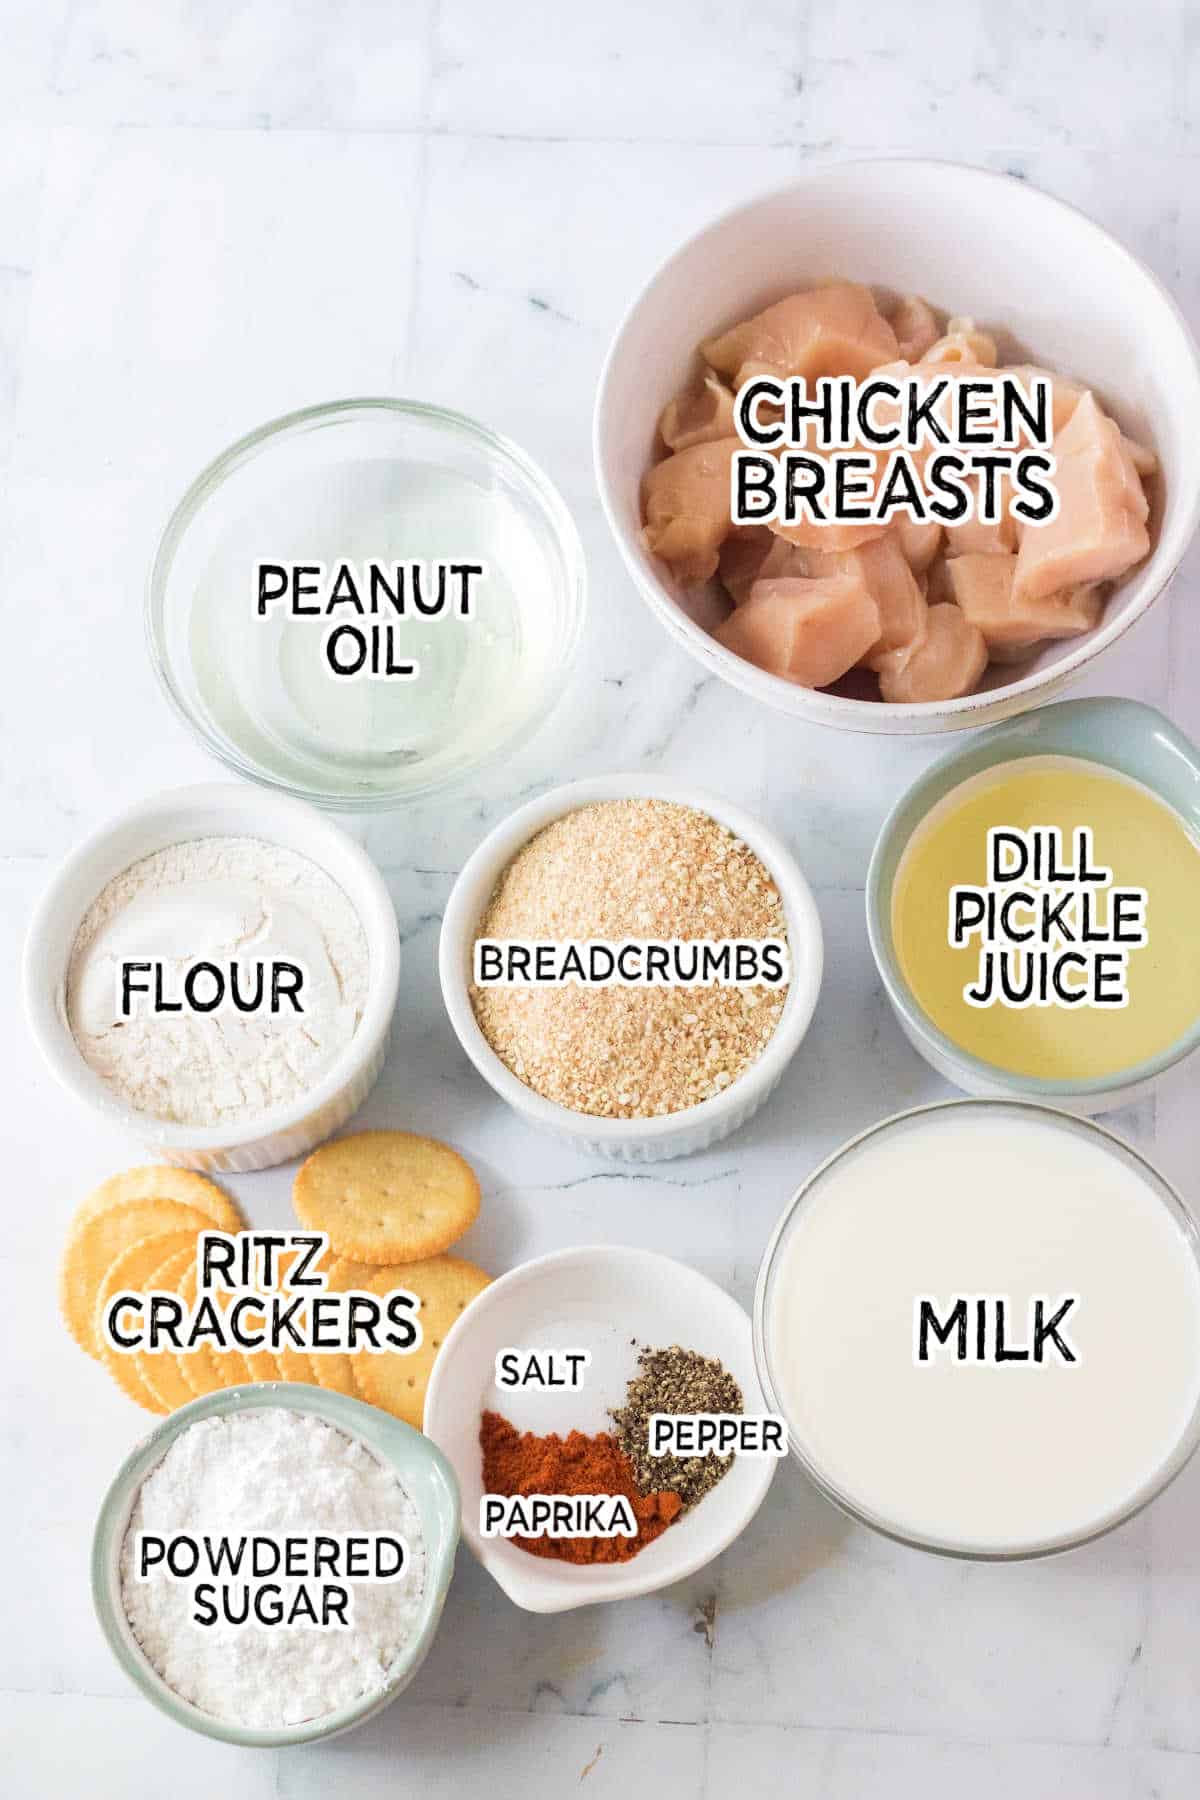 Ingredients to make Chick Fil A Nuggets.